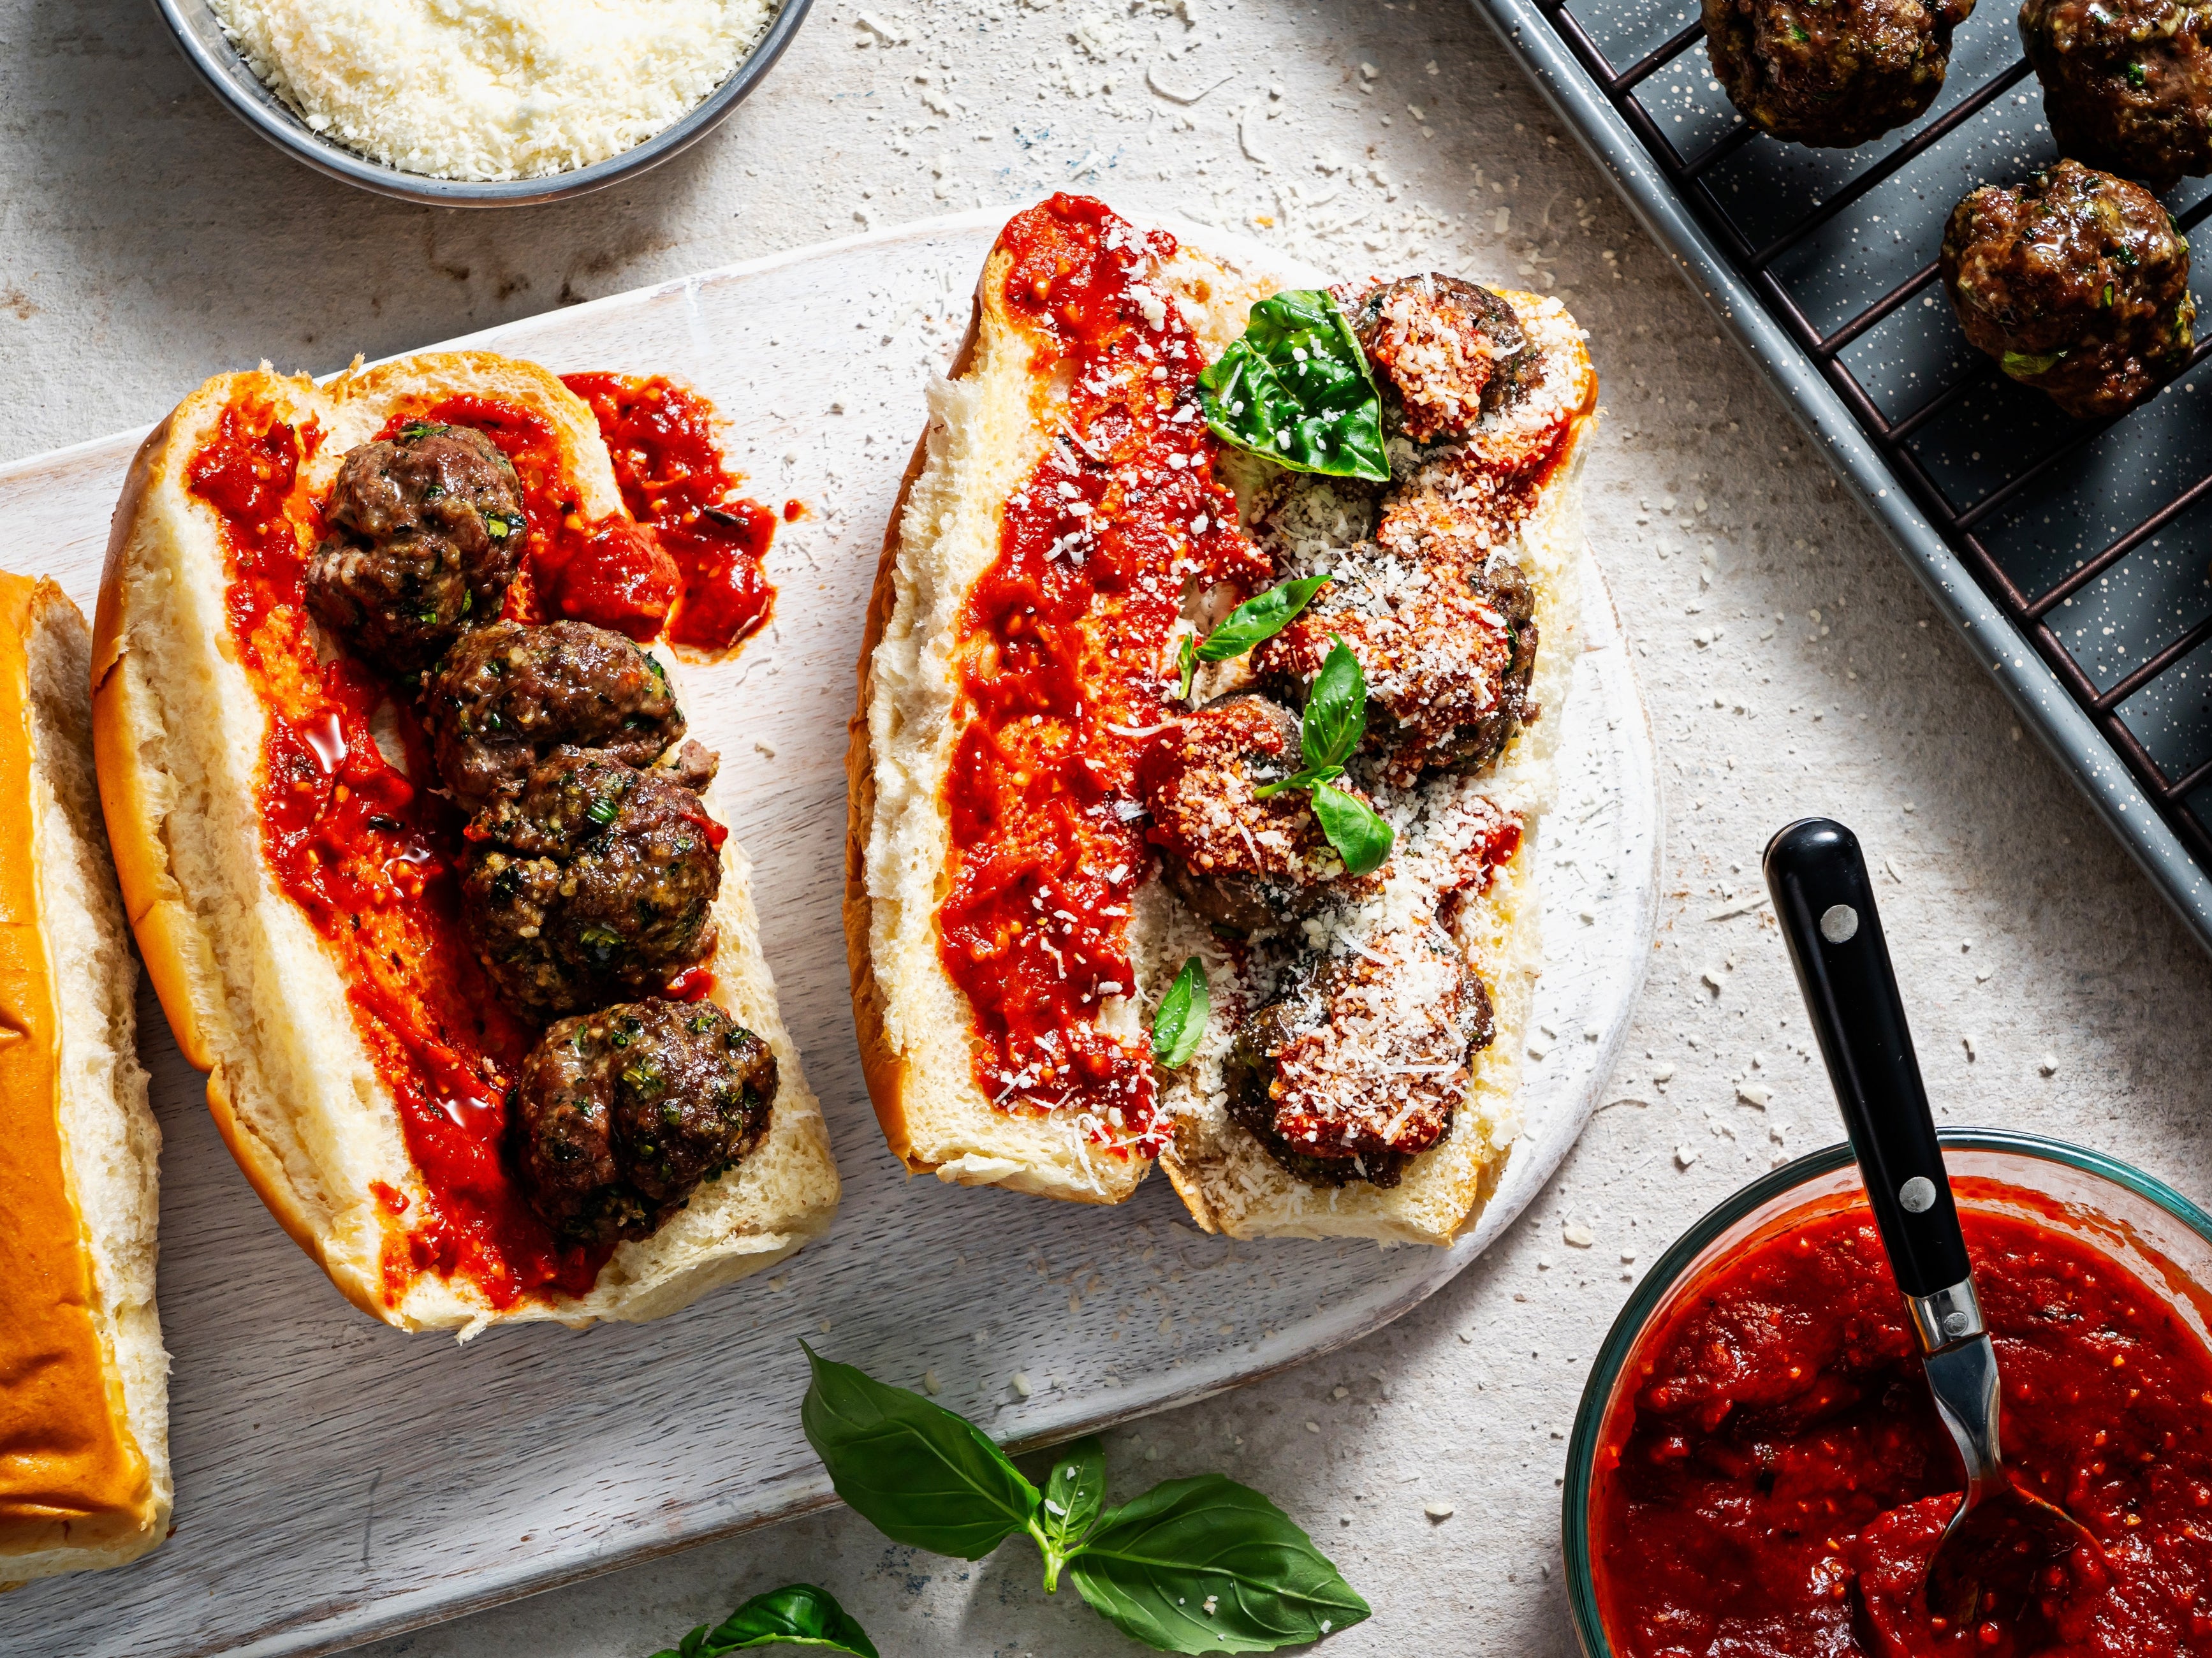 Realising you can bake meatballs is ‘life-changing’